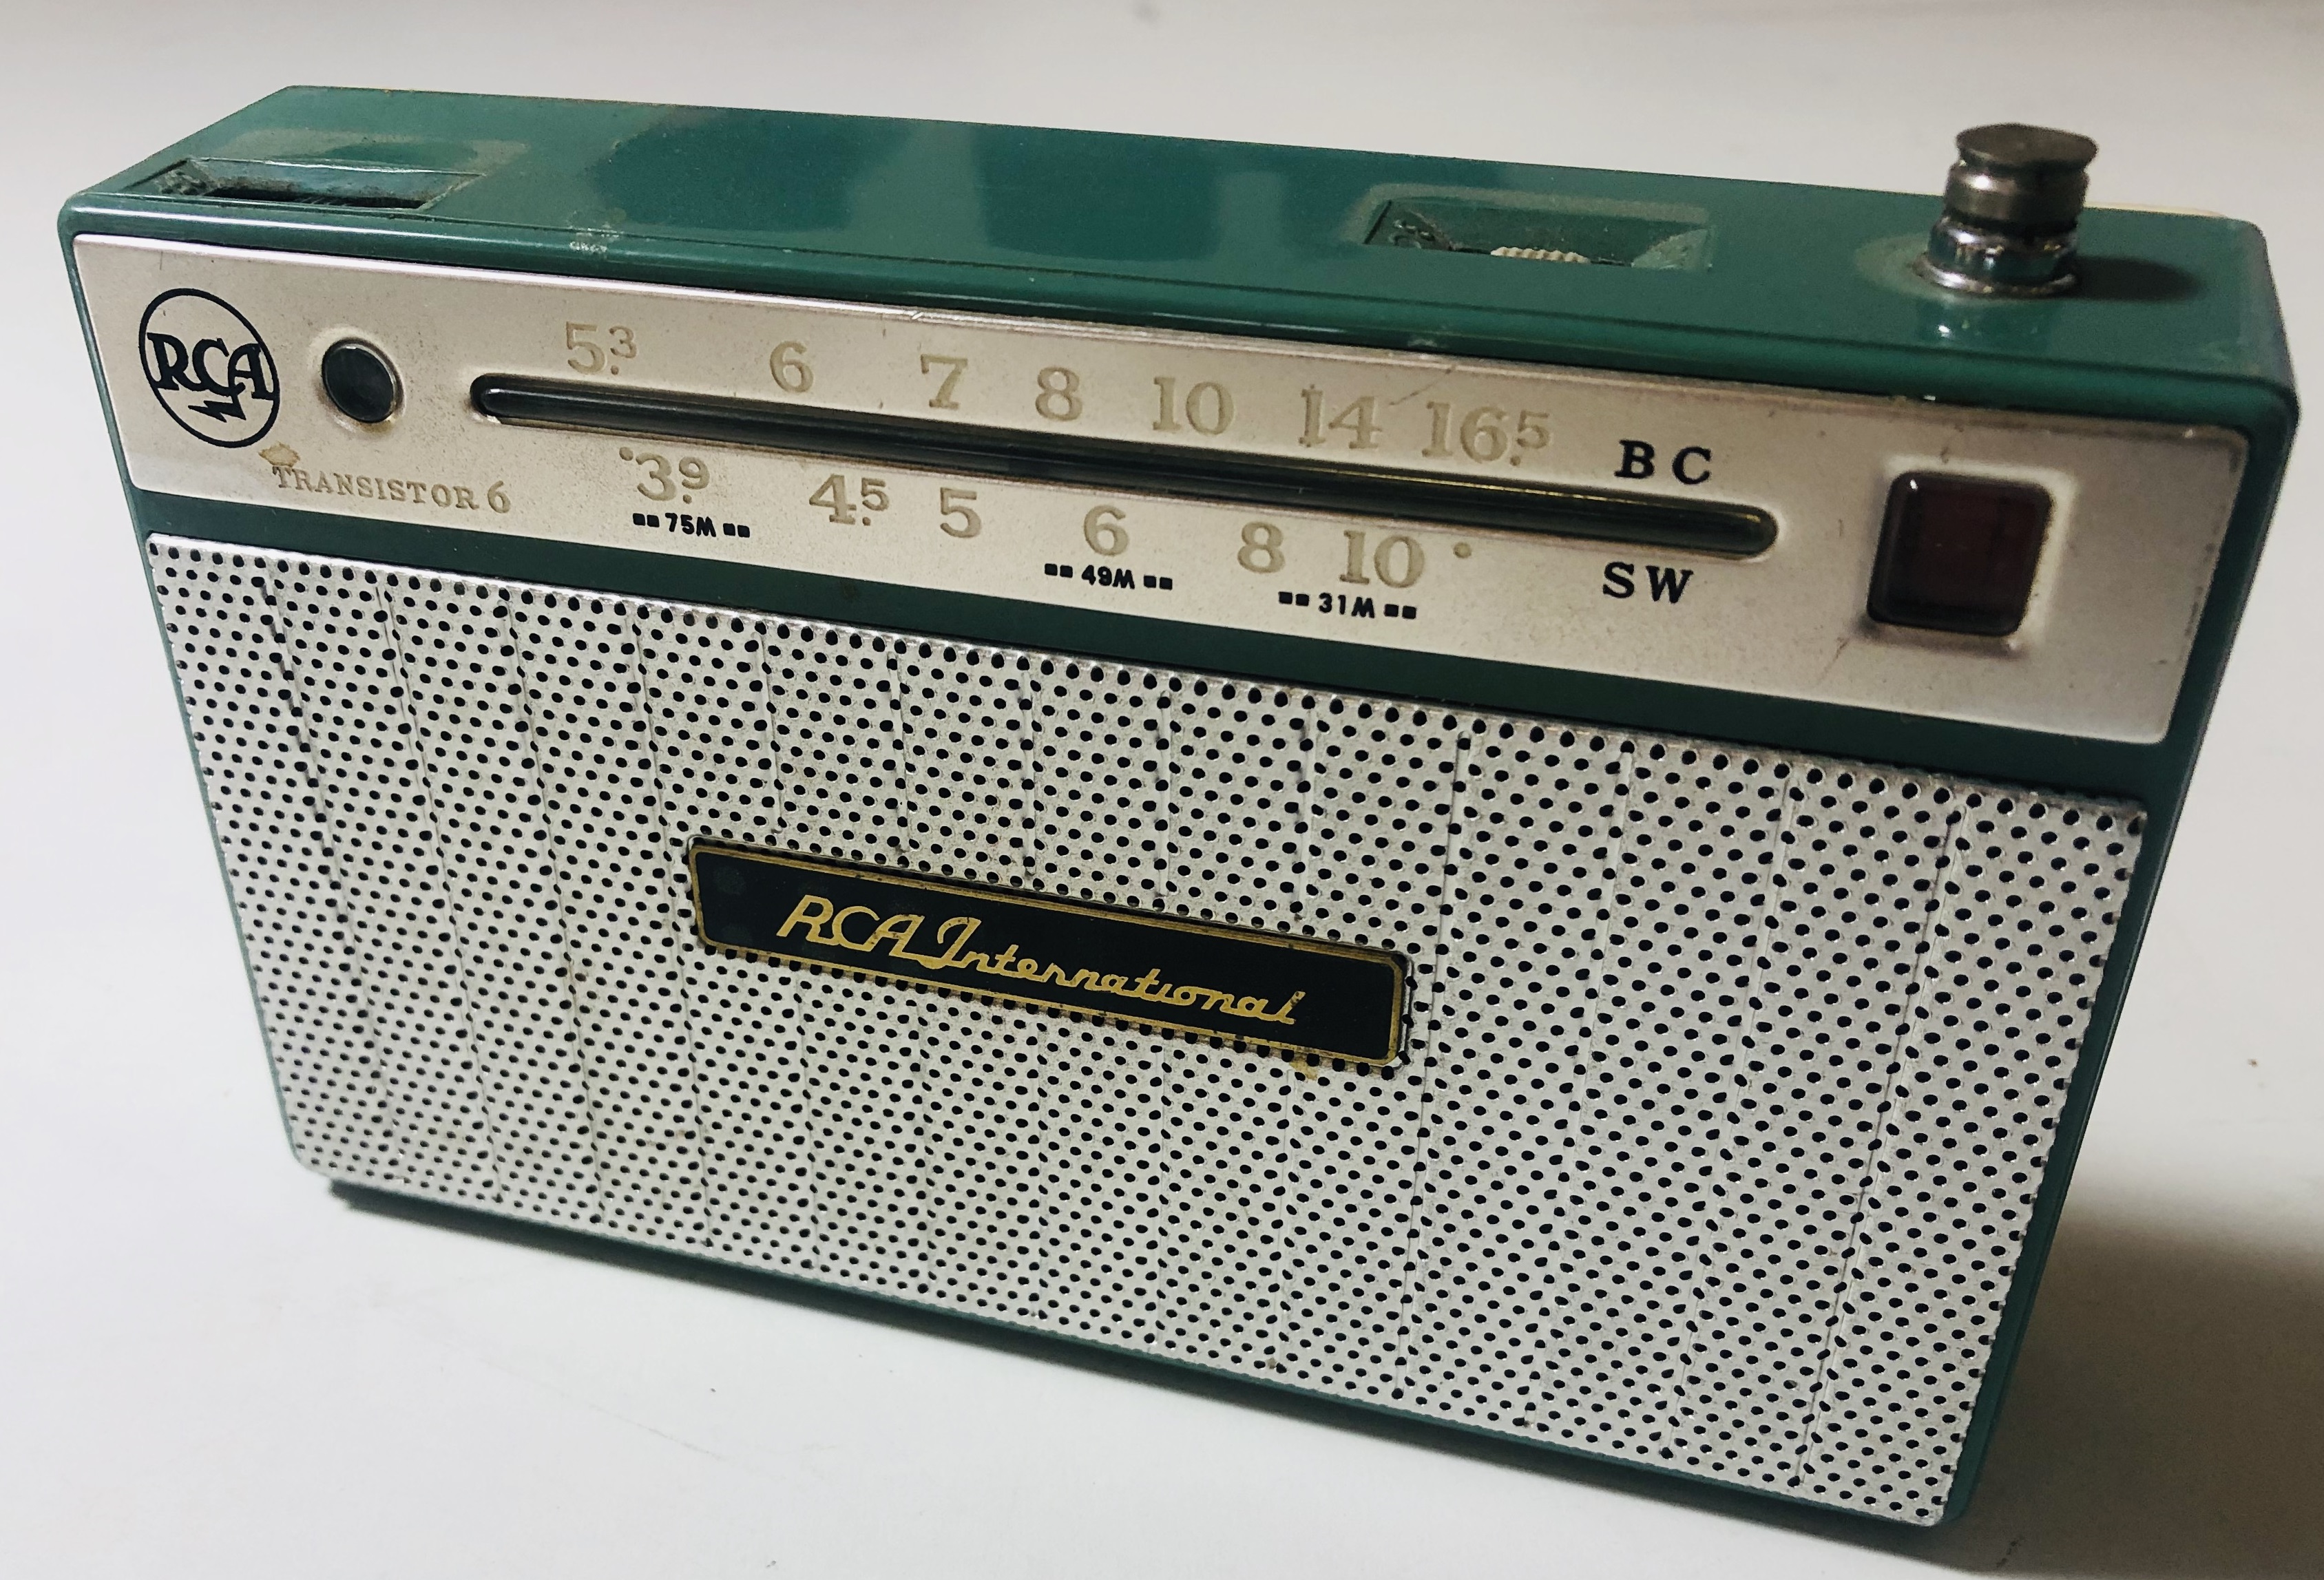 A radio once owned by Elvis Presley is going under-the-hammer 